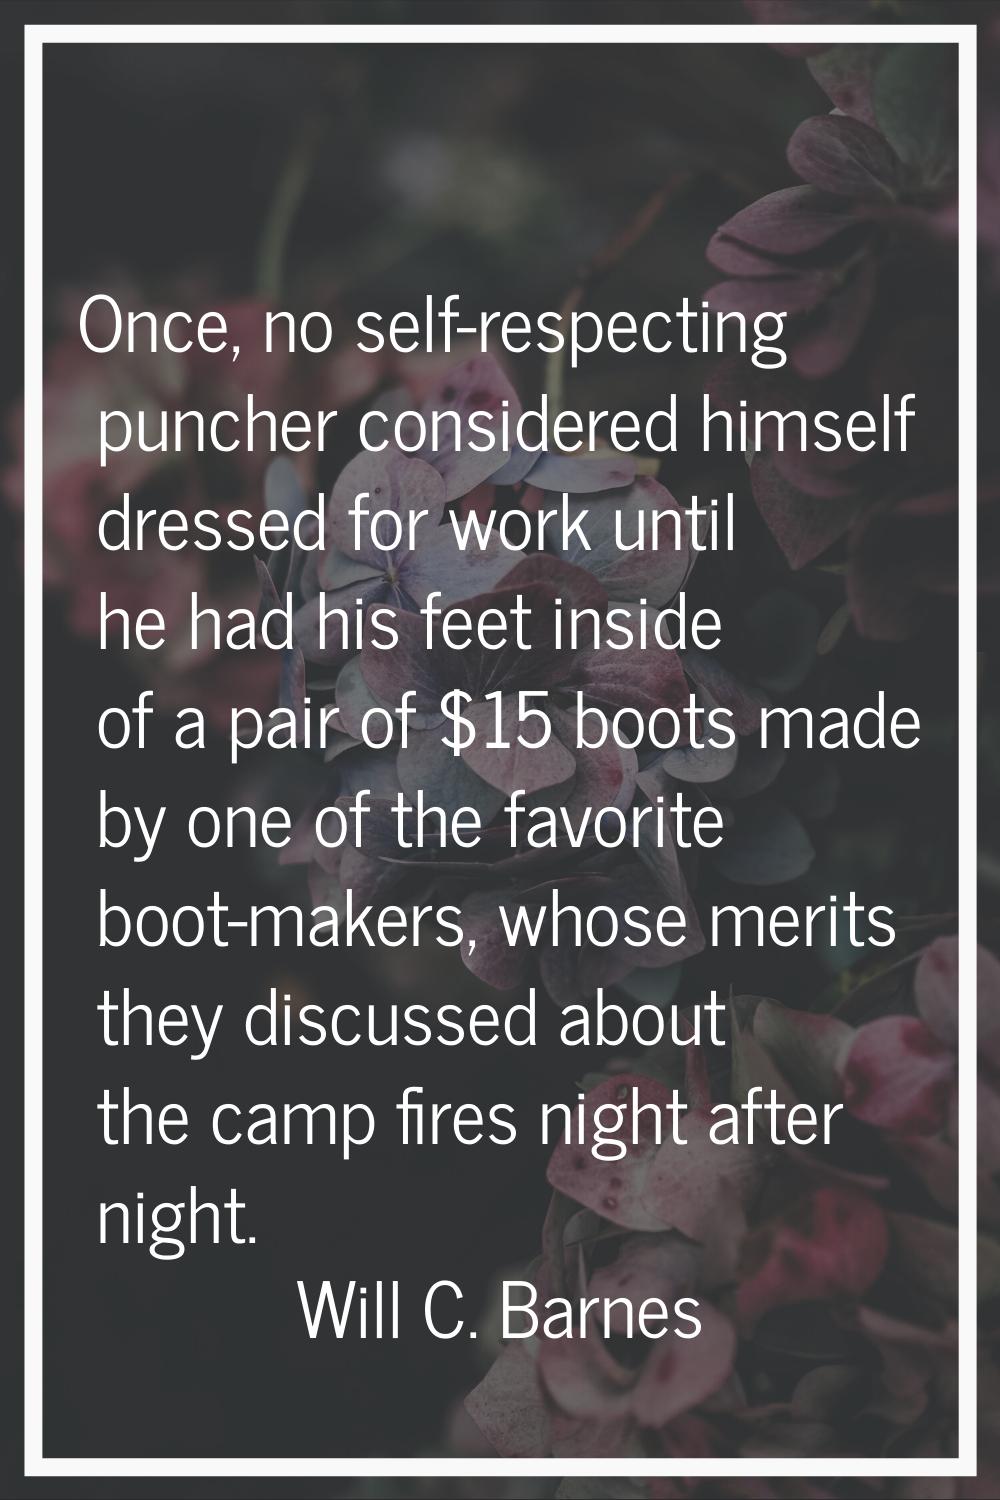 Once, no self-respecting puncher considered himself dressed for work until he had his feet inside o